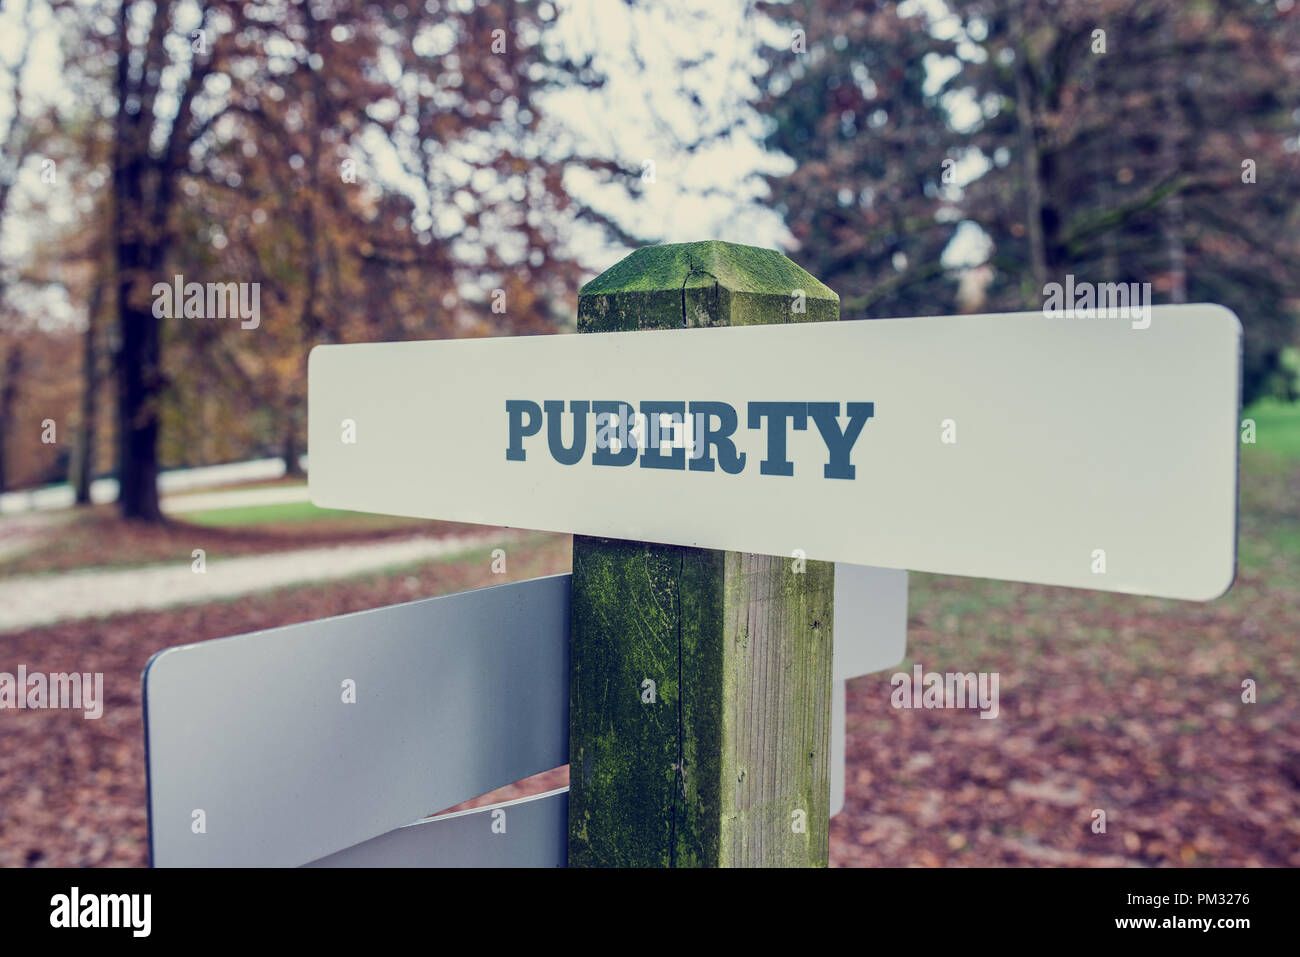 Puberty signboard on a wooden post  outdoors against greenery in a faded retro image. Stock Photo